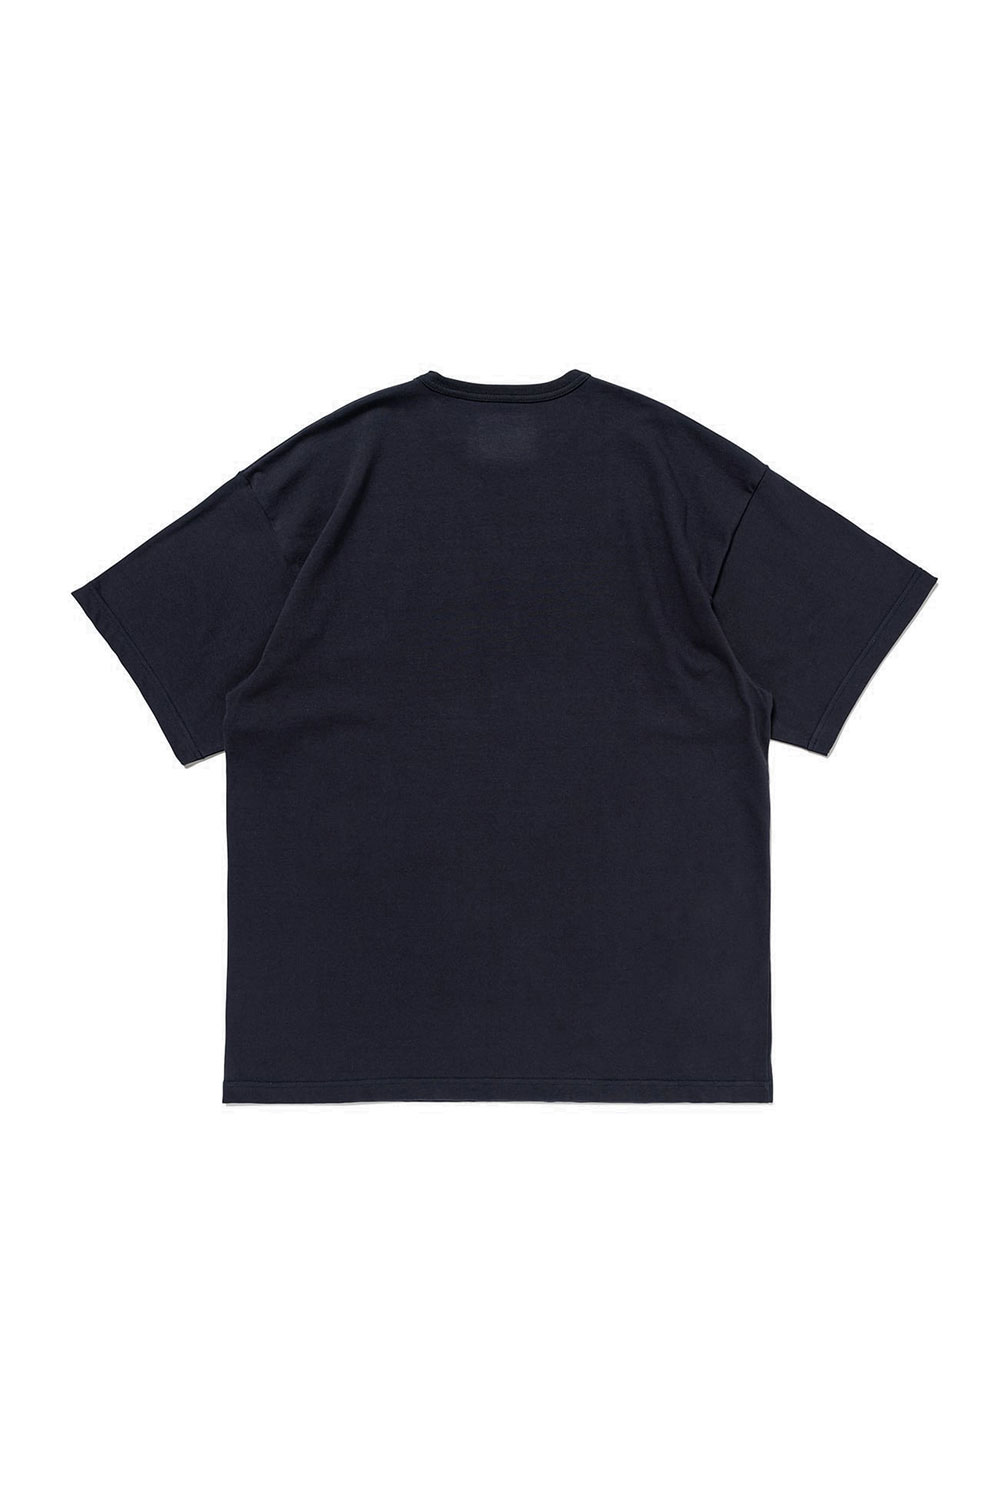 Tシャツ/カットソー(半袖/袖なし)2021SS WTAPS COLLEGE / SS / COTTON |  www.operationmedical.org - Tシャツ/カットソー(半袖/袖なし)